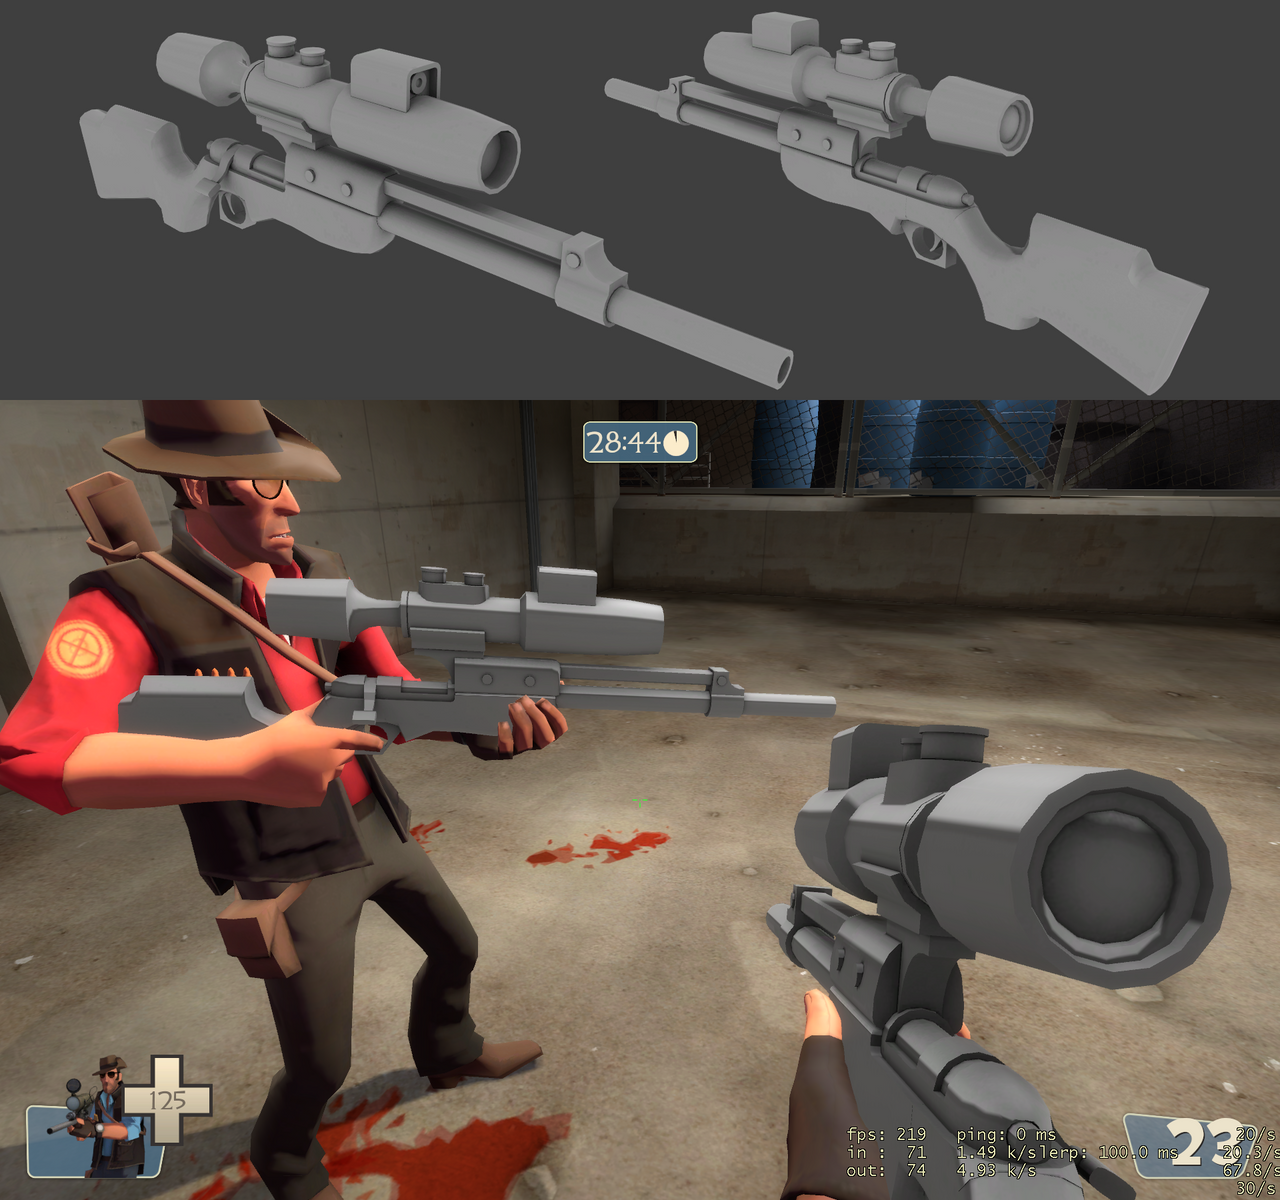 tf2_sniper_rifle_model_test_5_by_elbagast-d37ckby.png